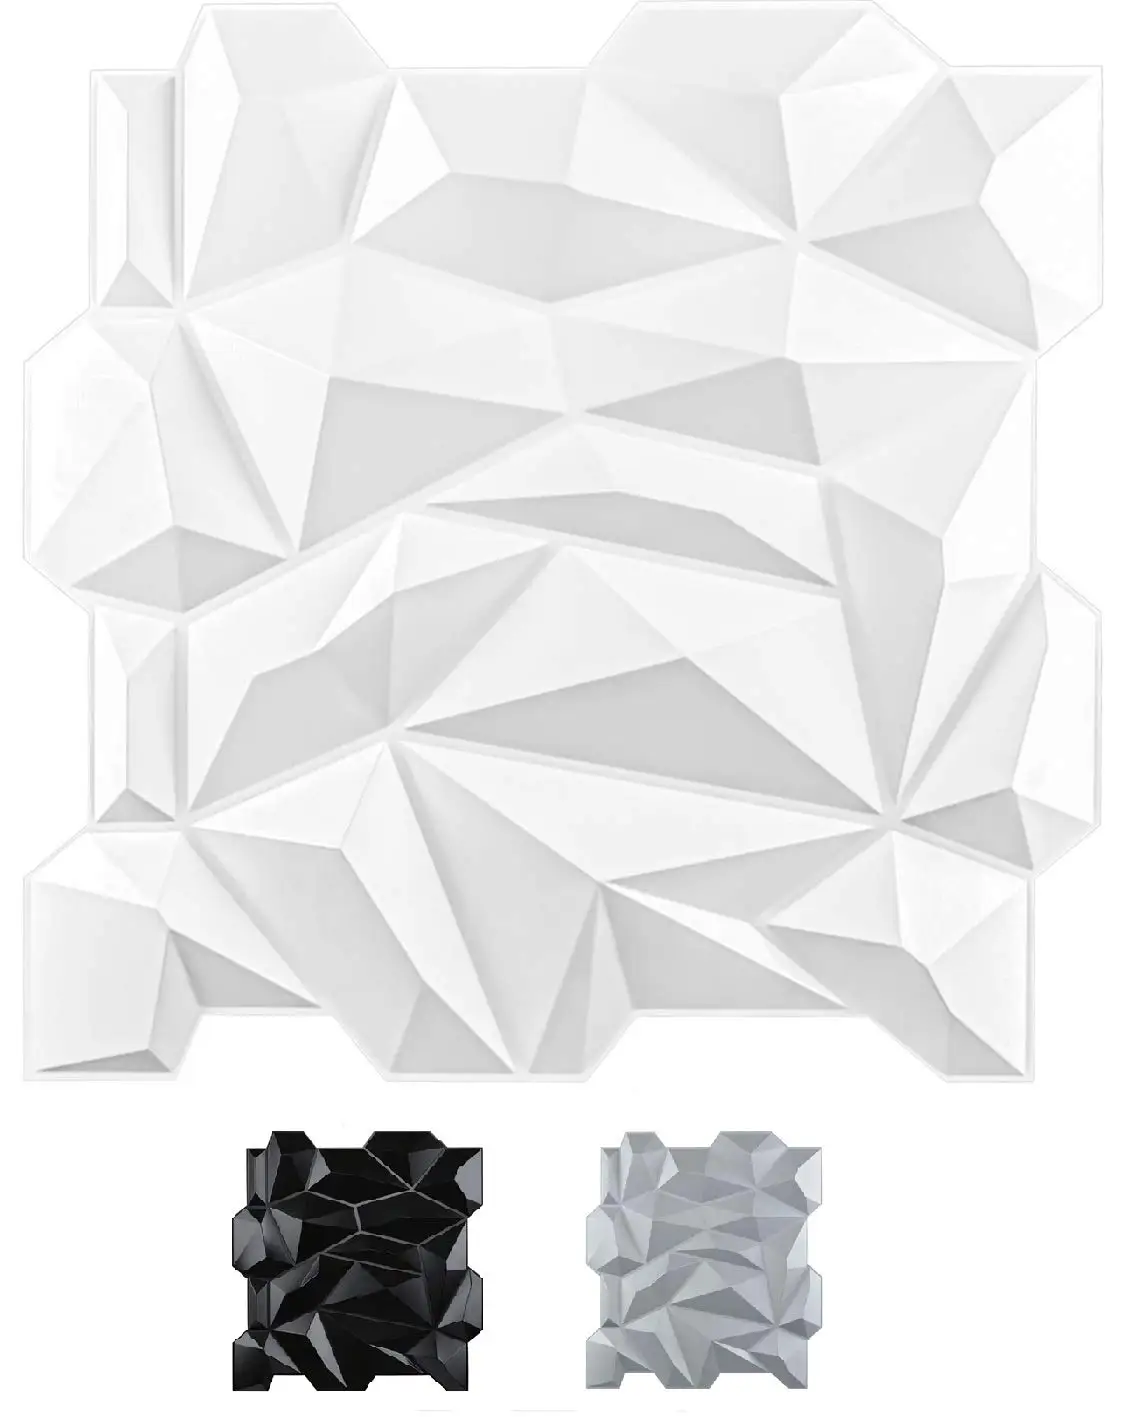 50x50cm Plastic 3D Diamond Wall Panels Jagged Matching-Matt White for Living Room Bedroom TV Background Ceiling Pack of 12 Tiles jagged alliance crossfire pc